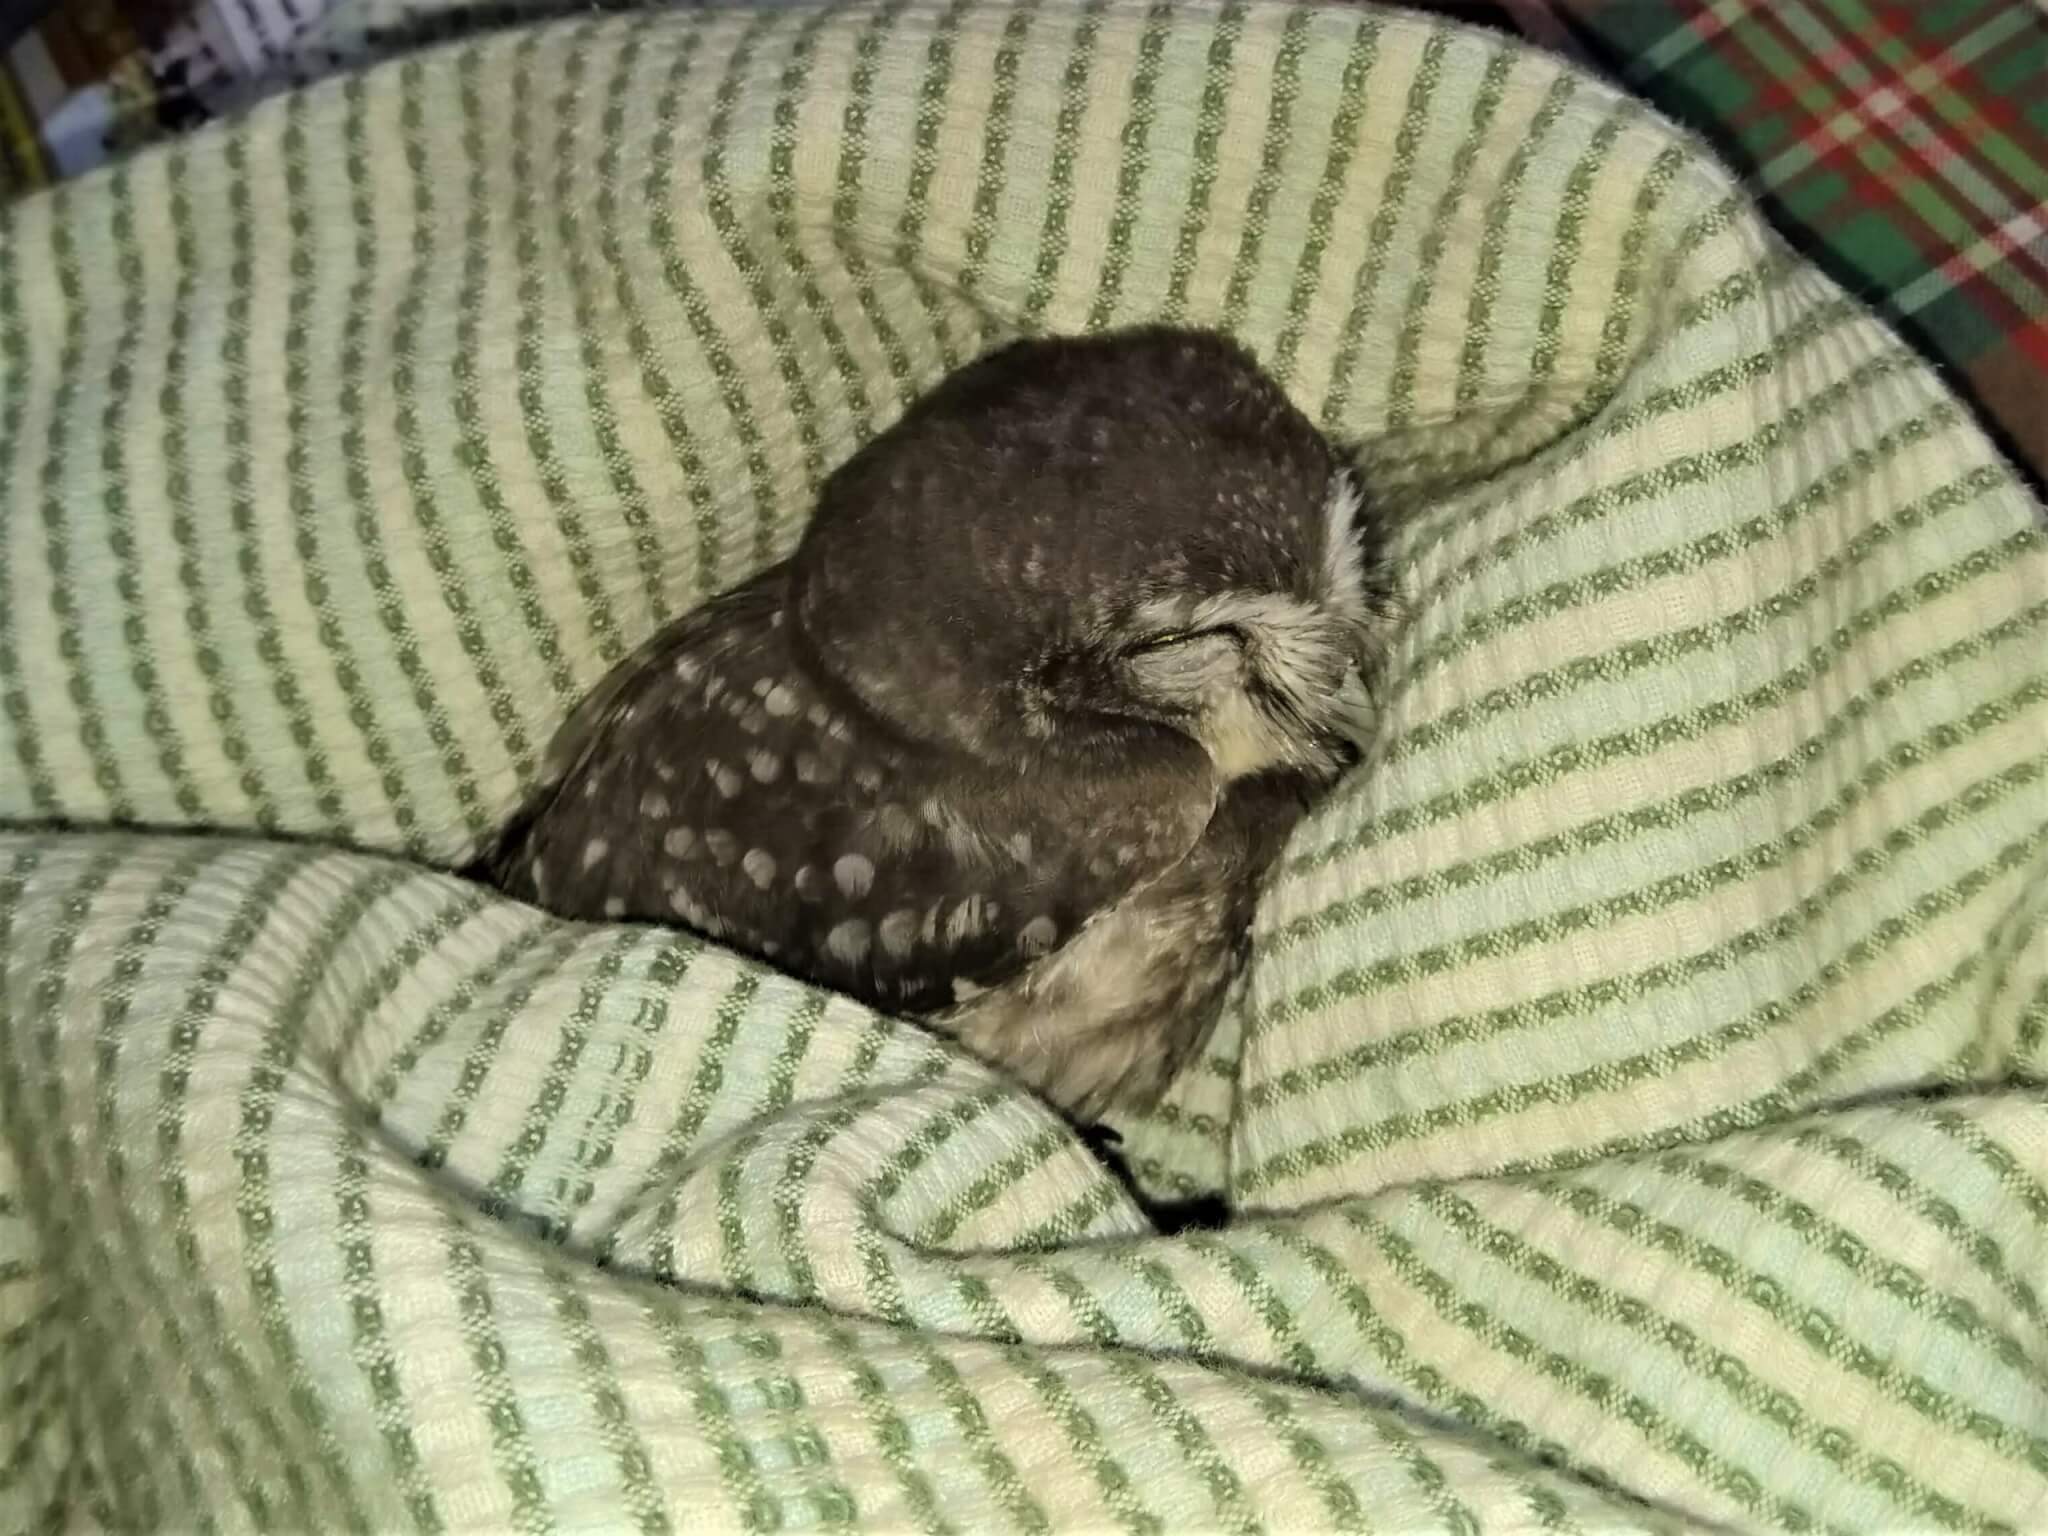 A spotted baby owlet sleeps snuggled into a striped blanket.